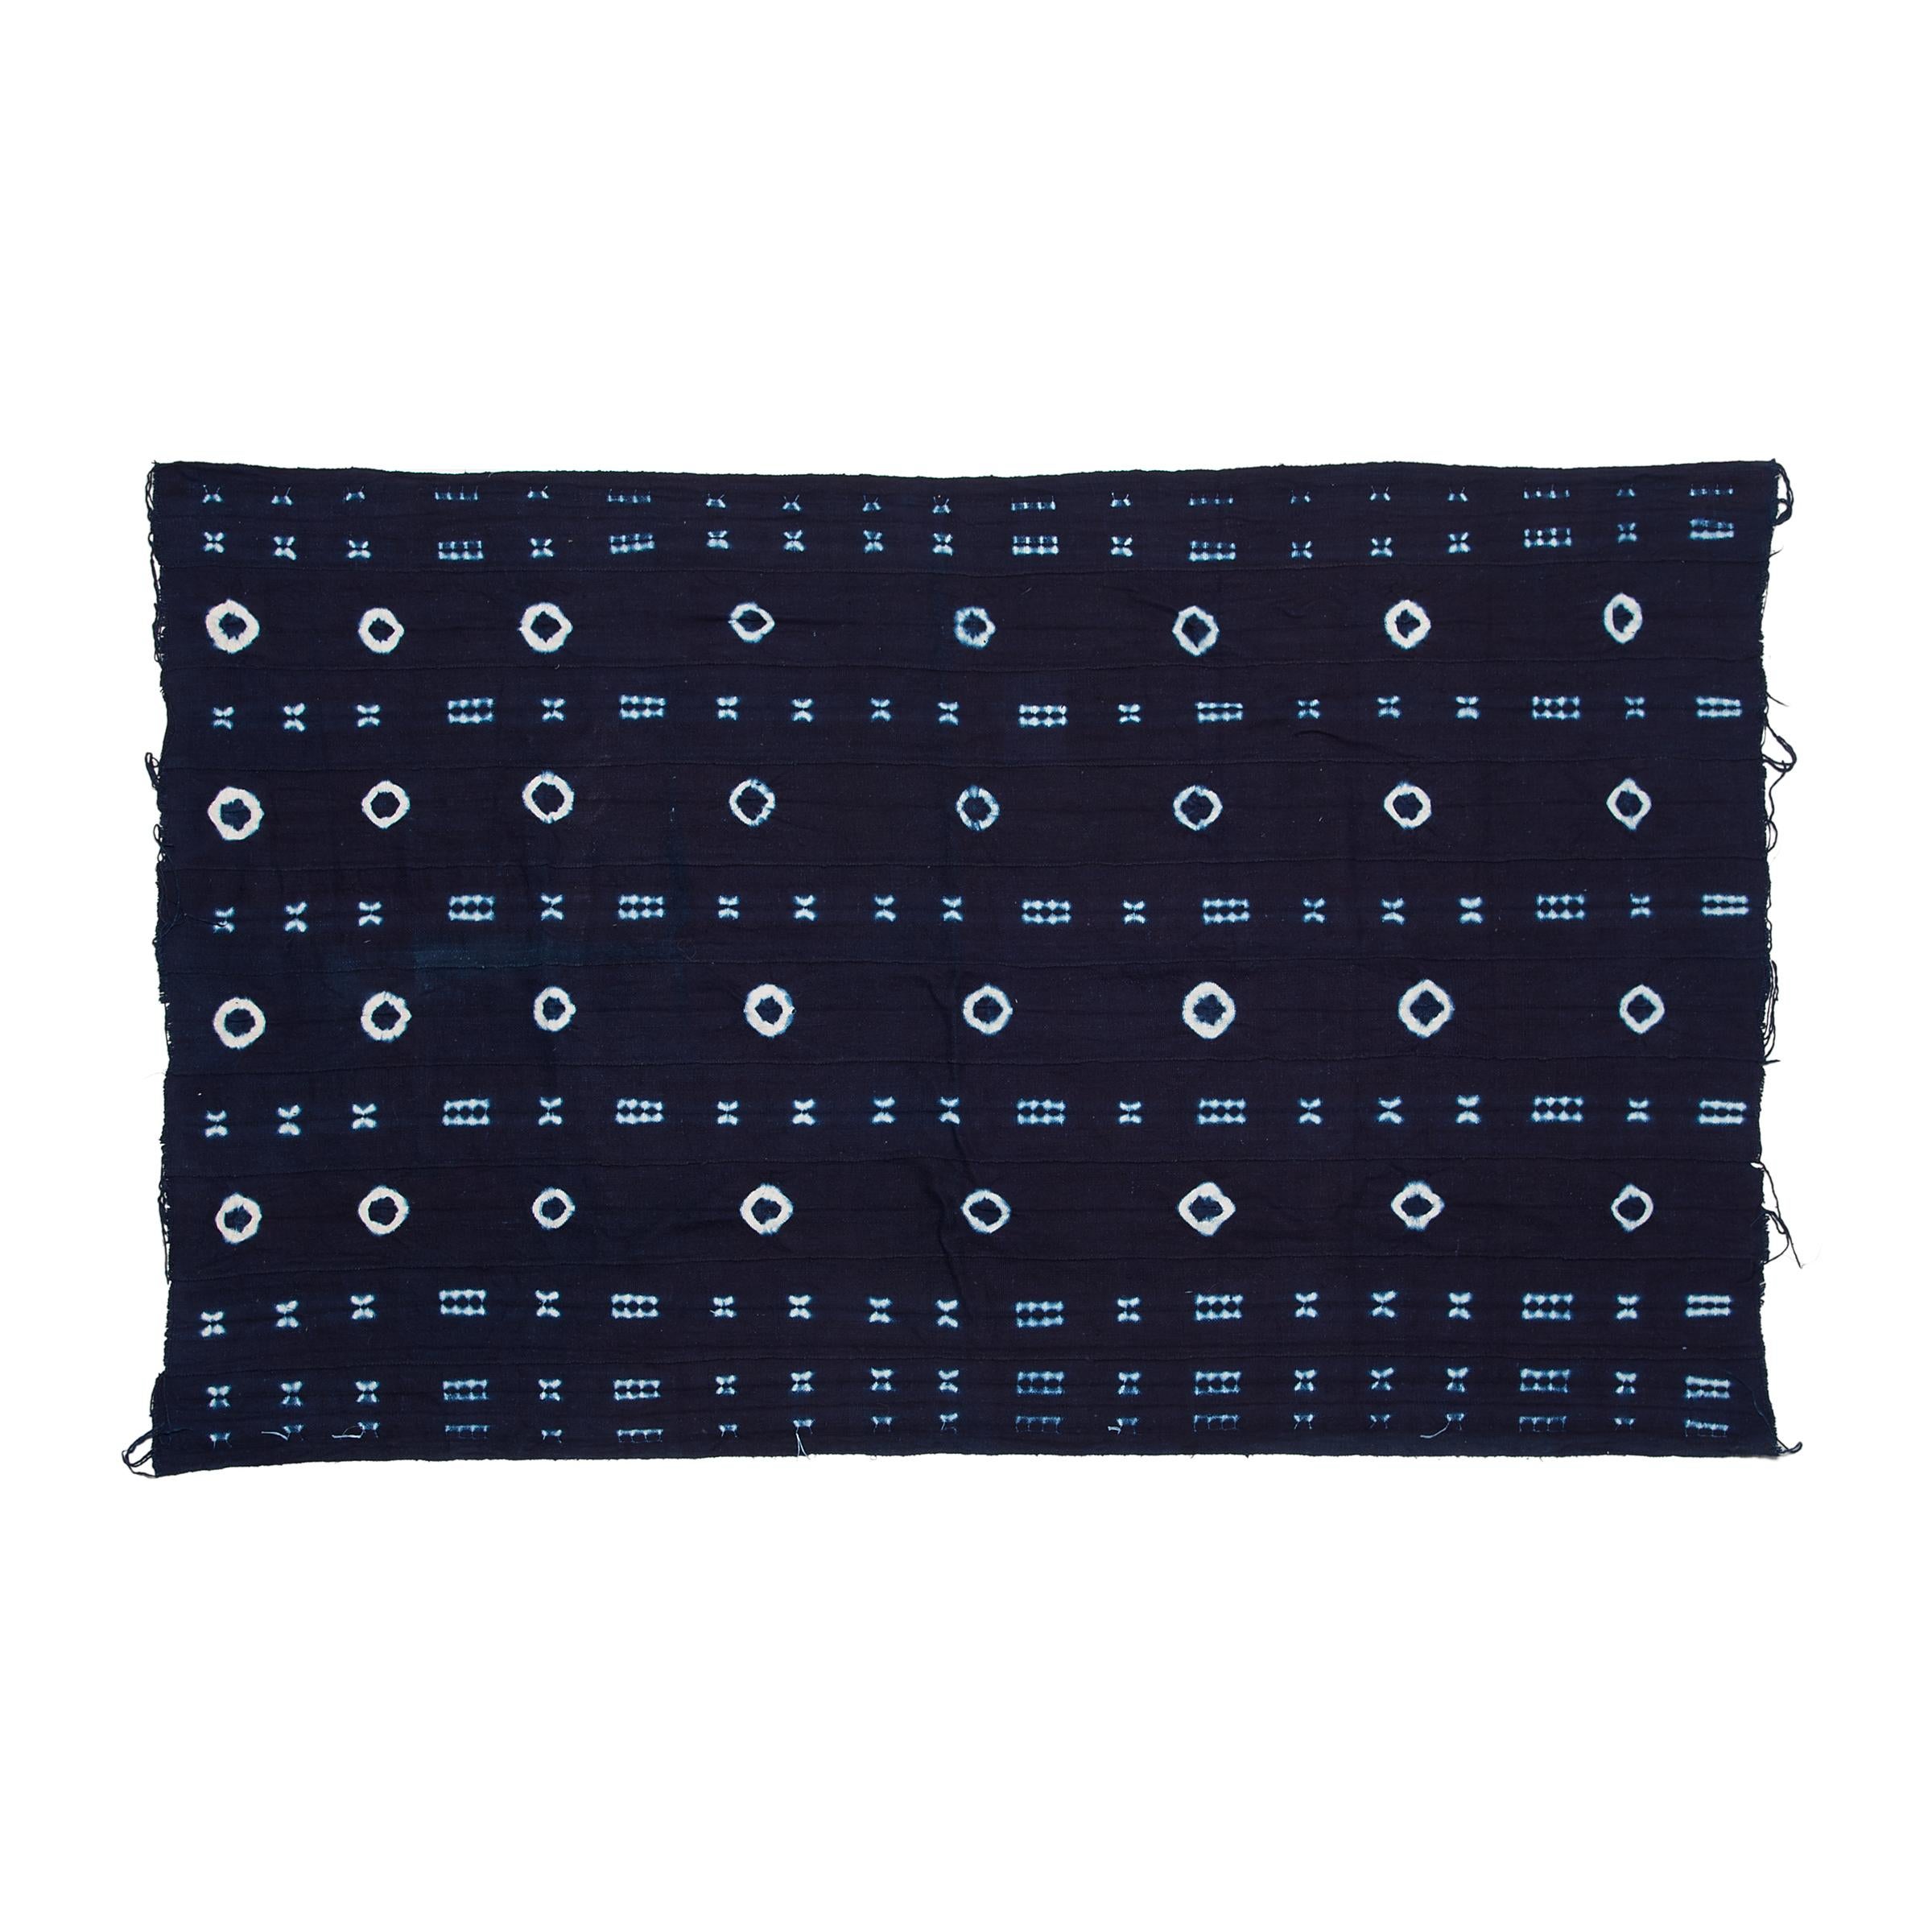 A vibrant and beautifully irregular pattern covers this indigo textile by the Yoruba People of Nigeria. Hand-dyed by women, this style of tie-resist indigo cloth is known as adire oniko and is achieved by tightly tying up portions of the strip-woven